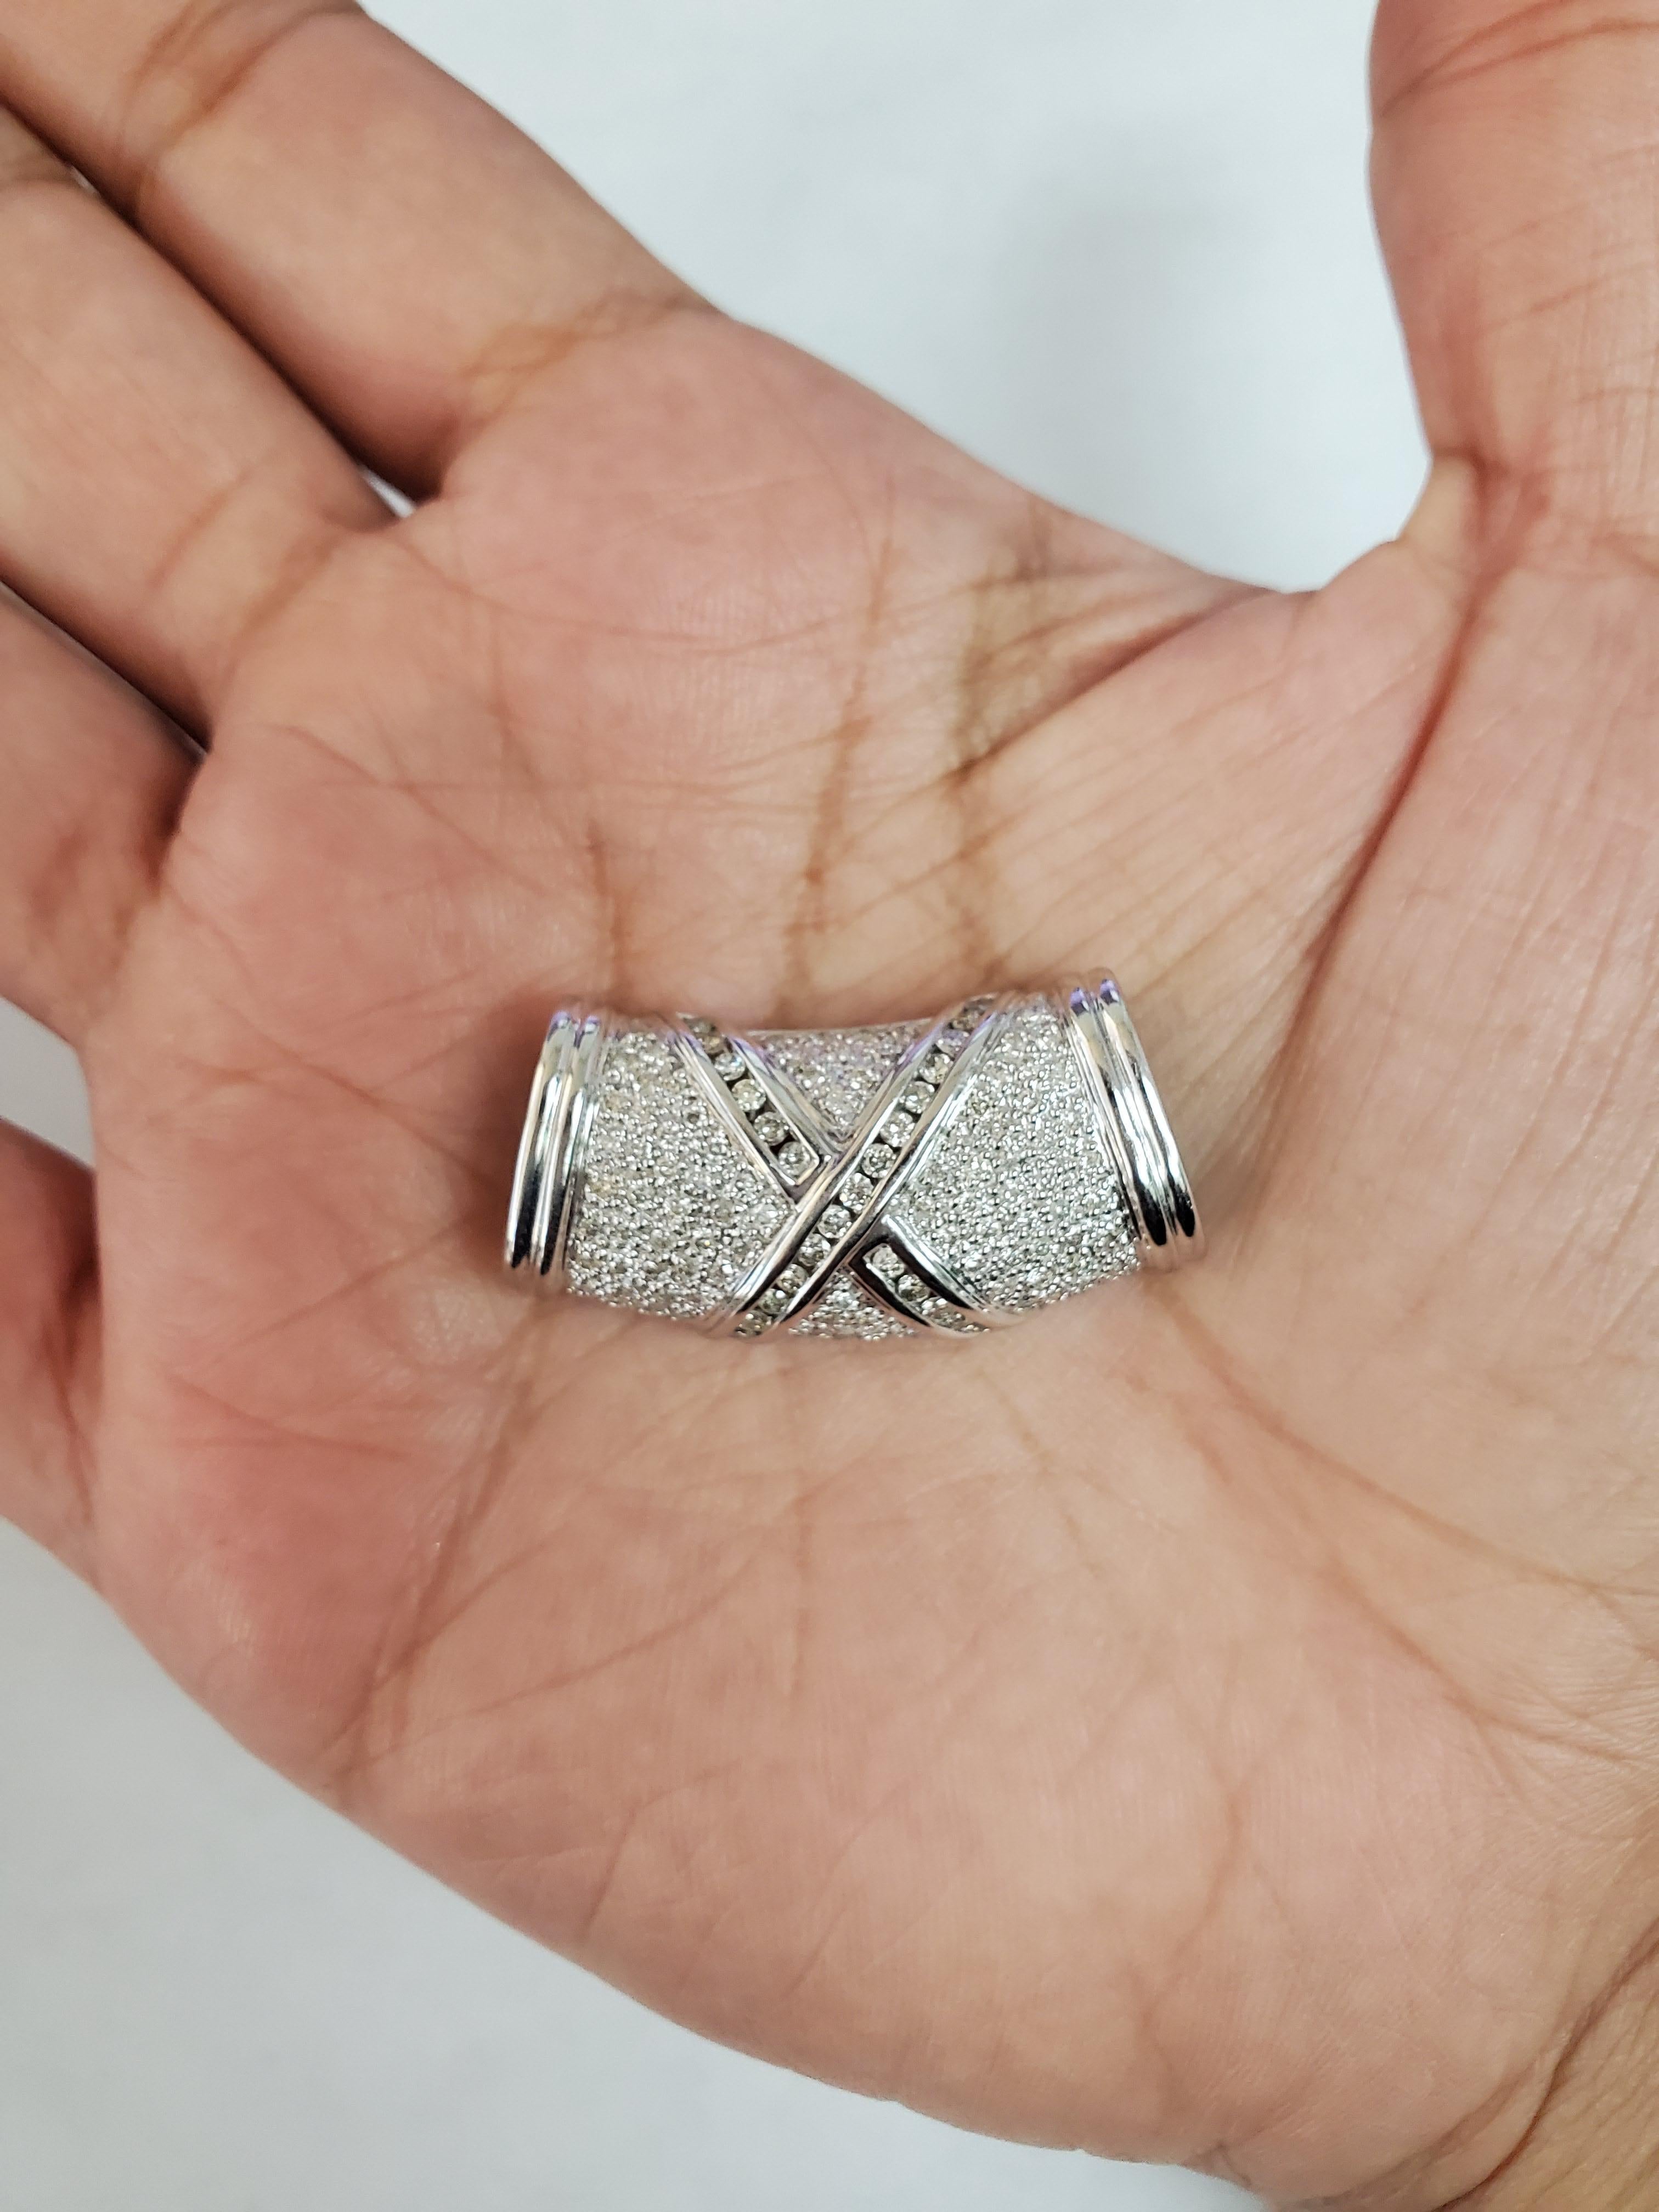 ♥ Product Summary ♥

Main Stone: Diamonds
Approx. Carat Weight: 1.50cttw
Metal Choice: 14K White Gold 
Diamond Clarity: SI1/SI2
Diamond Color: G/H
Stone Cut: Round
Number of Stones: 128 Diamonds
Dimensions: 16mm x 35mm 
Chain: 1.1mm Link Chain